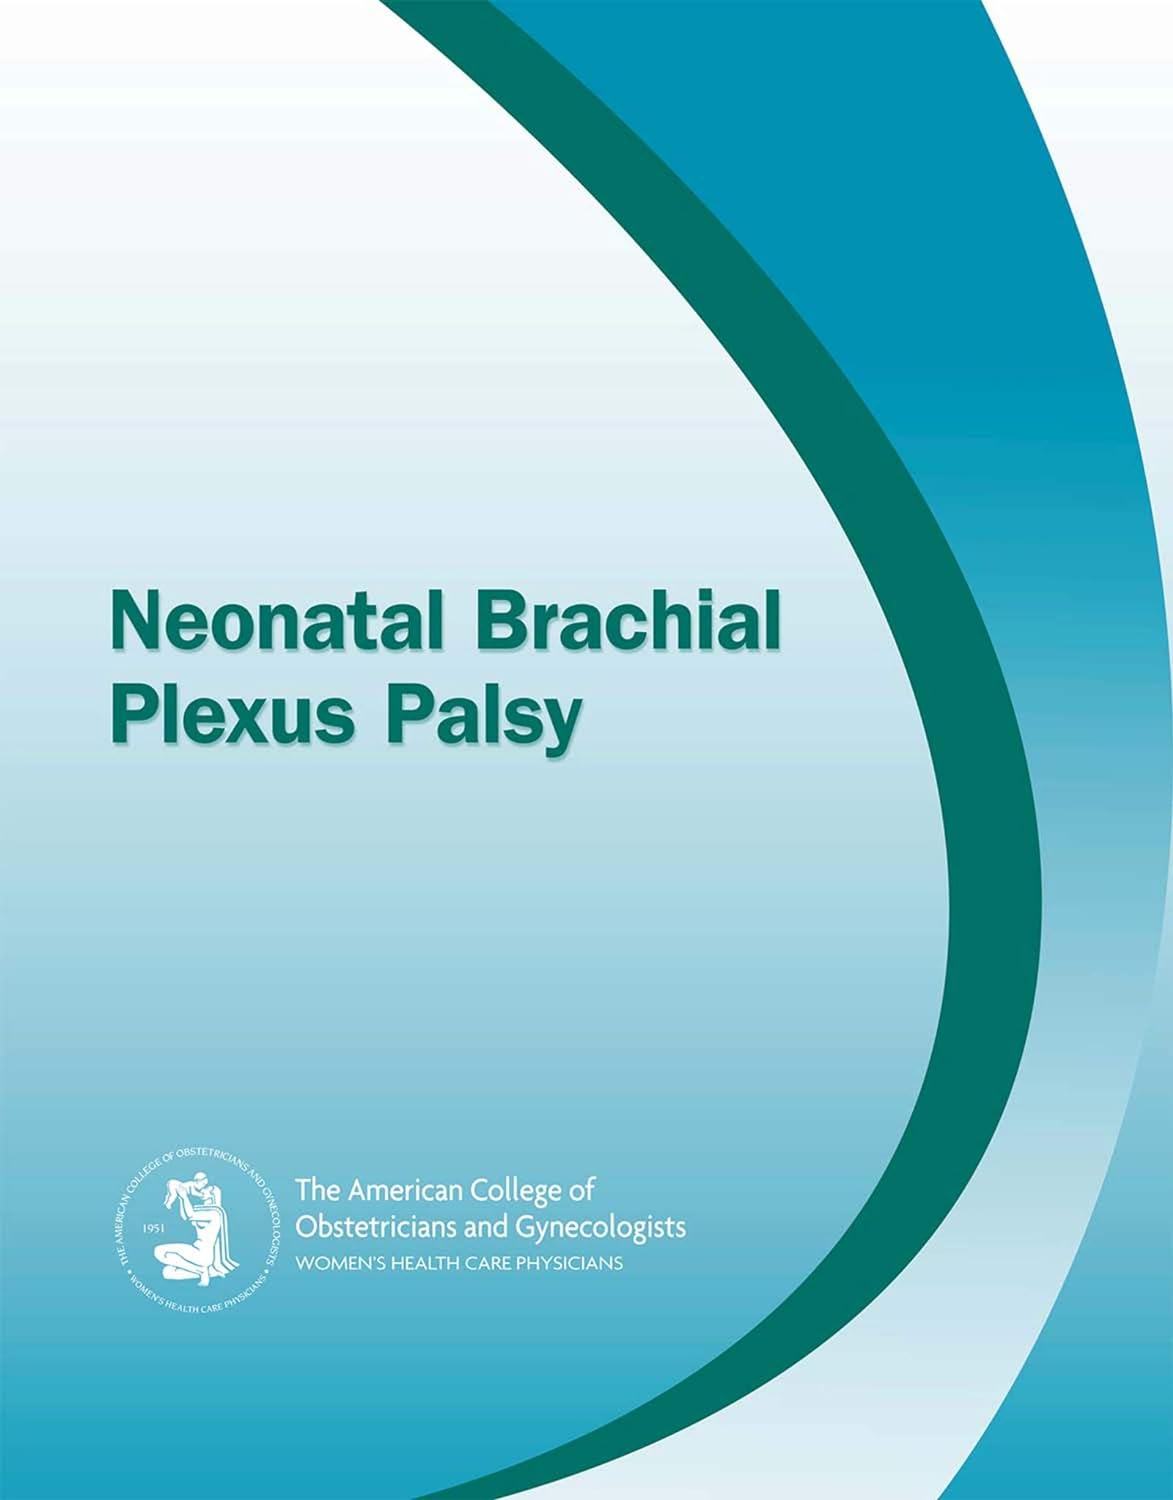 Neonatal Brachial Plexus Palsy by American College of Obstetricians and Gynecologists